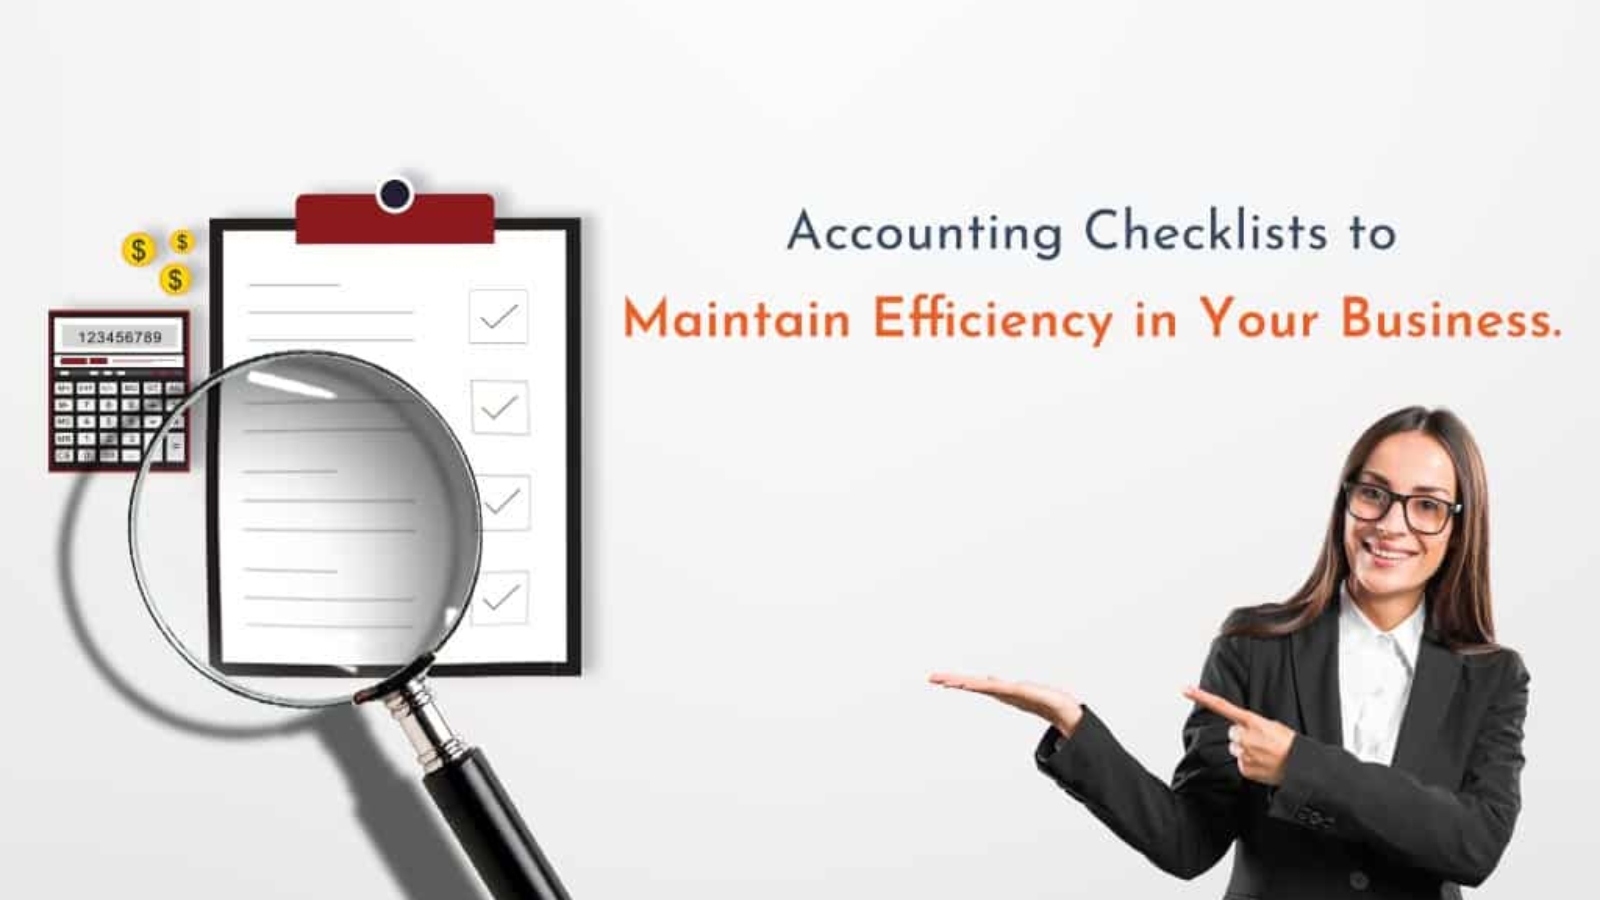 Accounting Checklists to Maintain Efficiency in Your Business